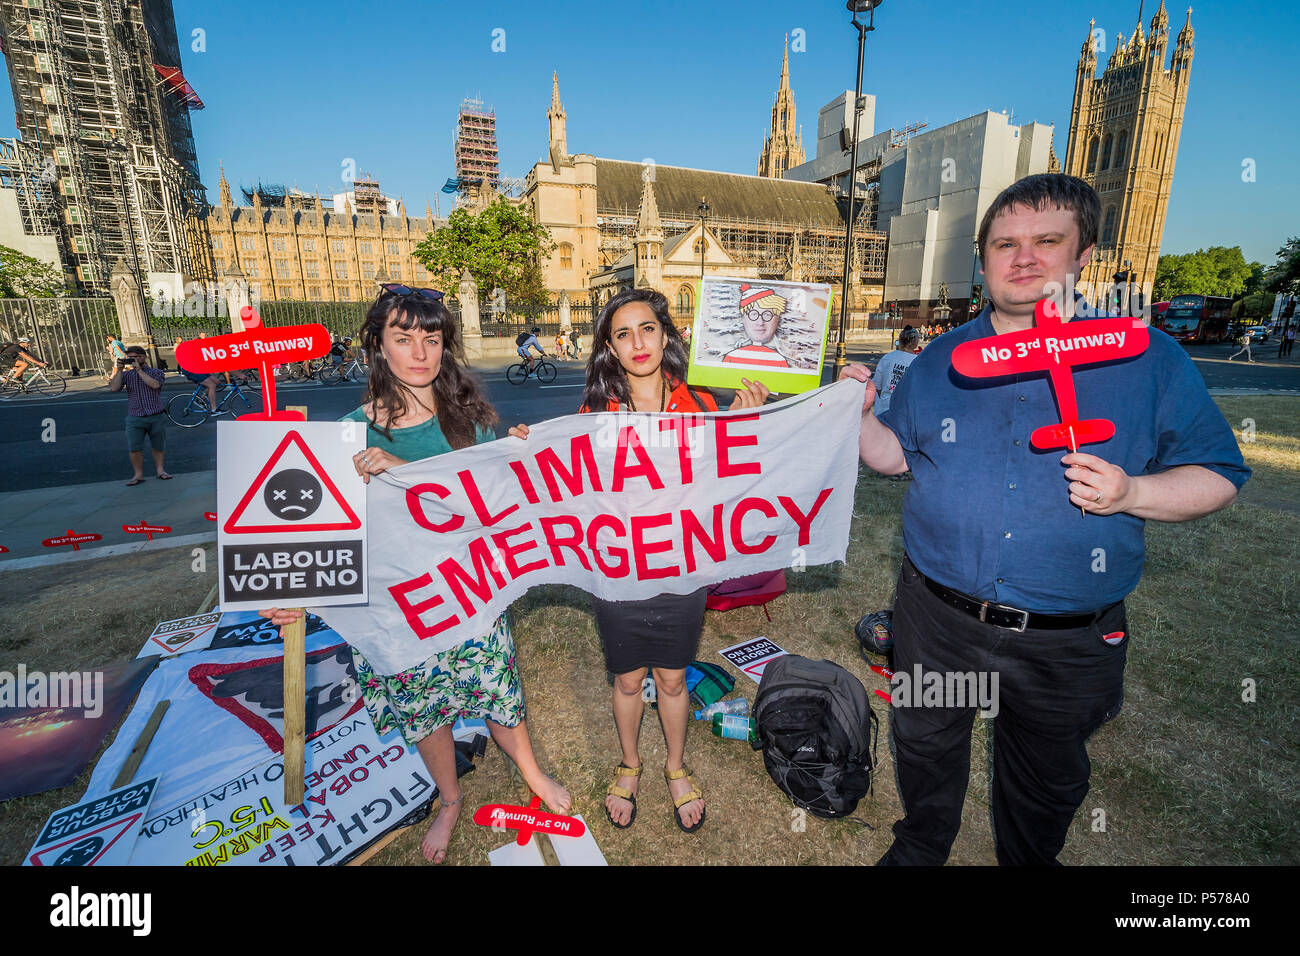 London, UK. 25th Jun, 2018. As parliament debates the Third Runway at Heathrow, protestors lobby inside and protest outside. Credit: Guy Bell/Alamy Live News Stock Photo